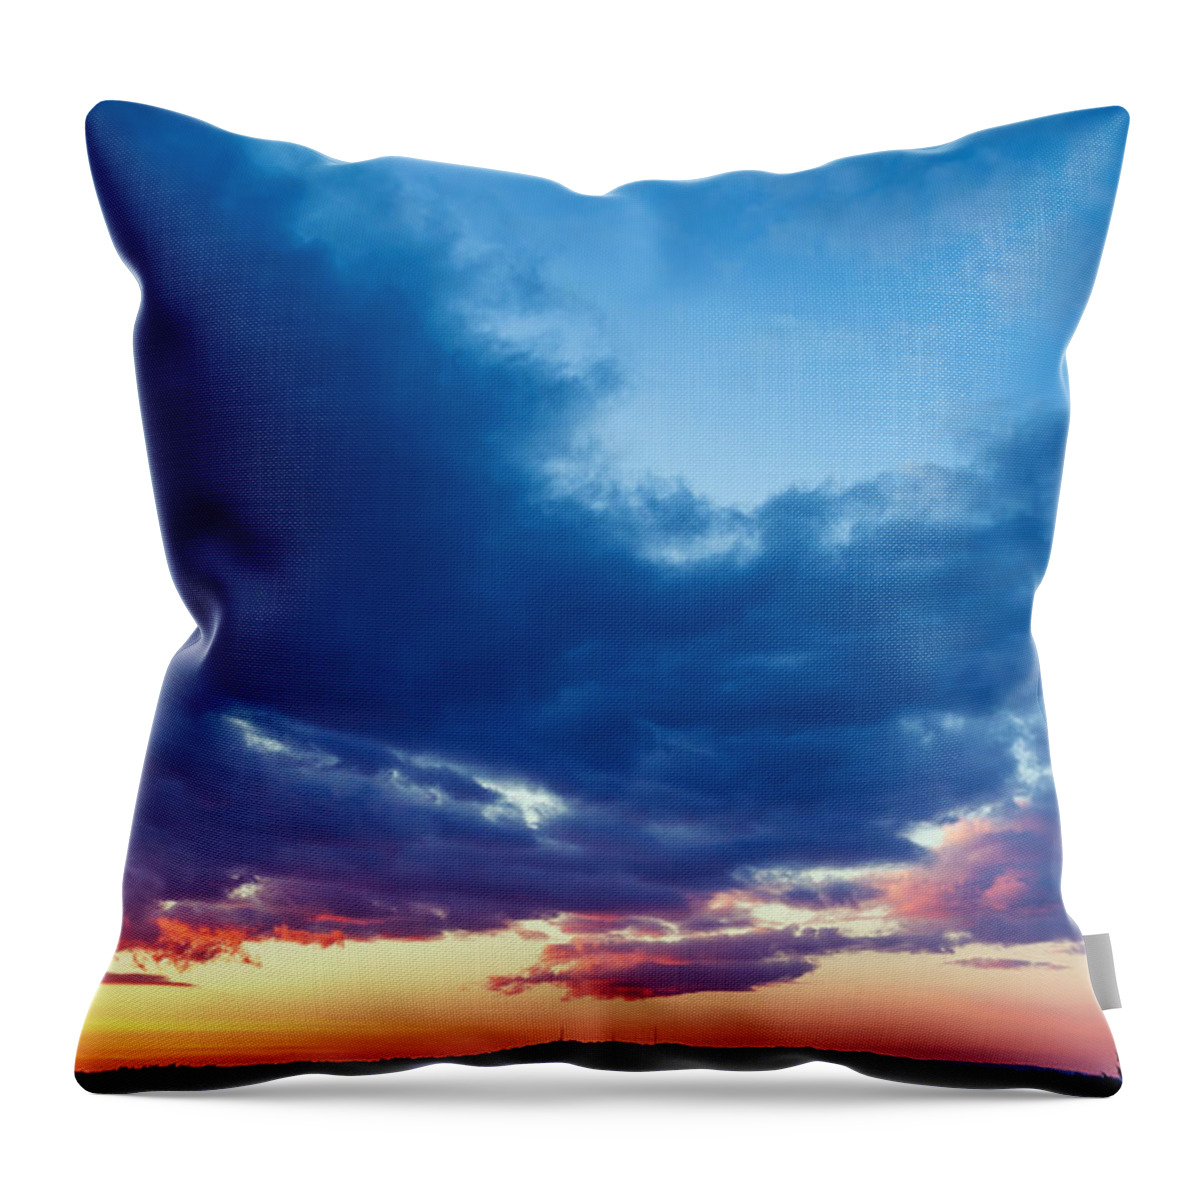 Scenics Throw Pillow featuring the photograph Beautiful Sunset Xxl by Kativ